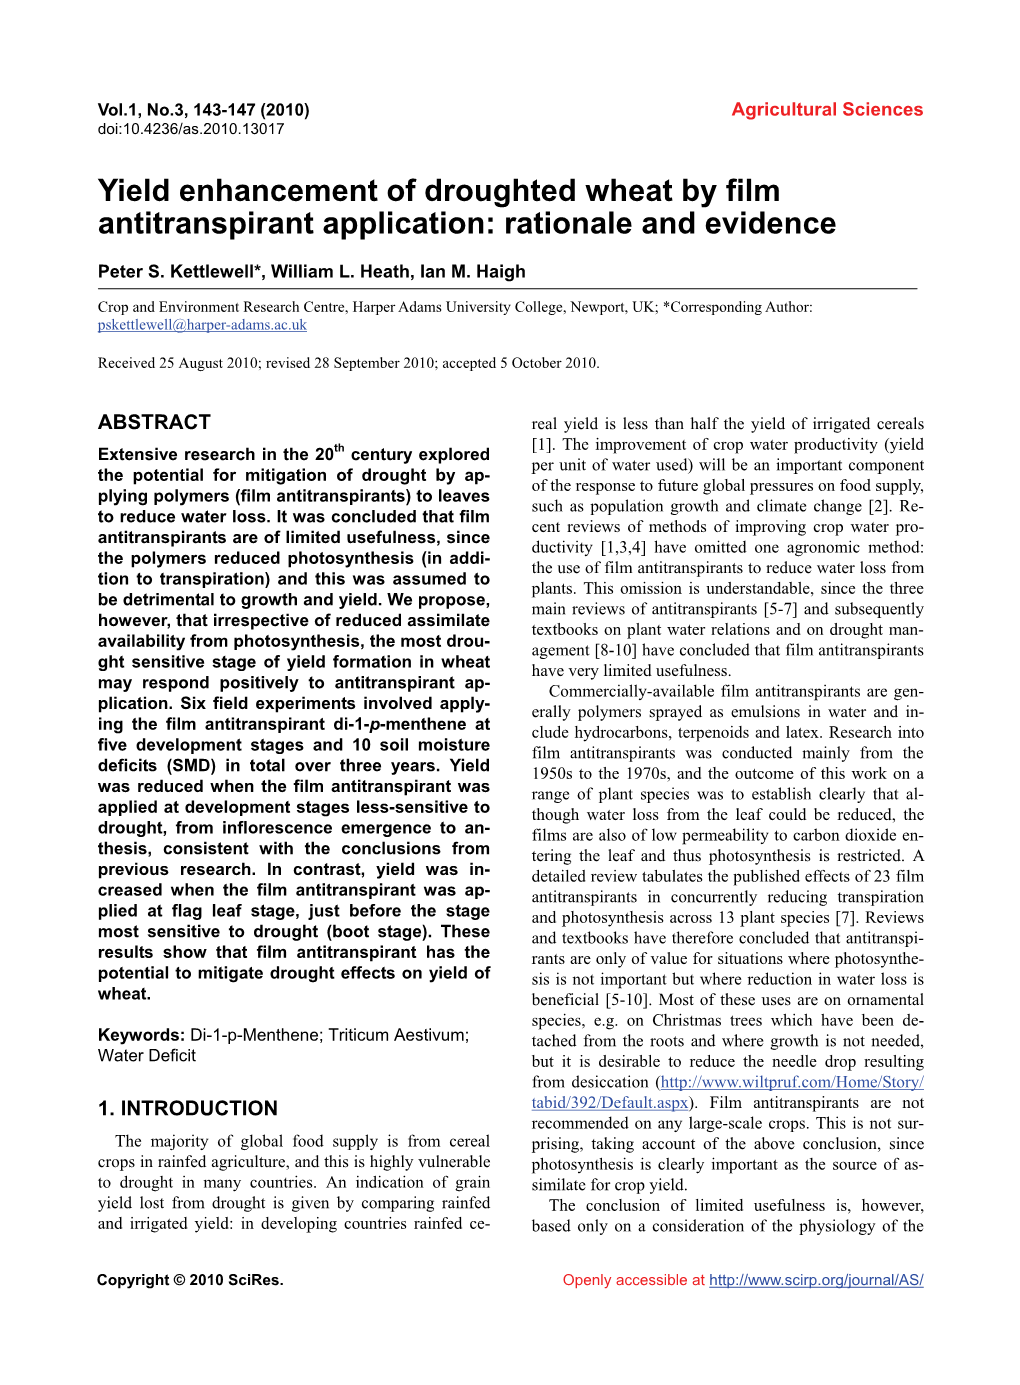 Yield Enhancement of Droughted Wheat by Film Antitranspirant Application: Rationale and Evidence